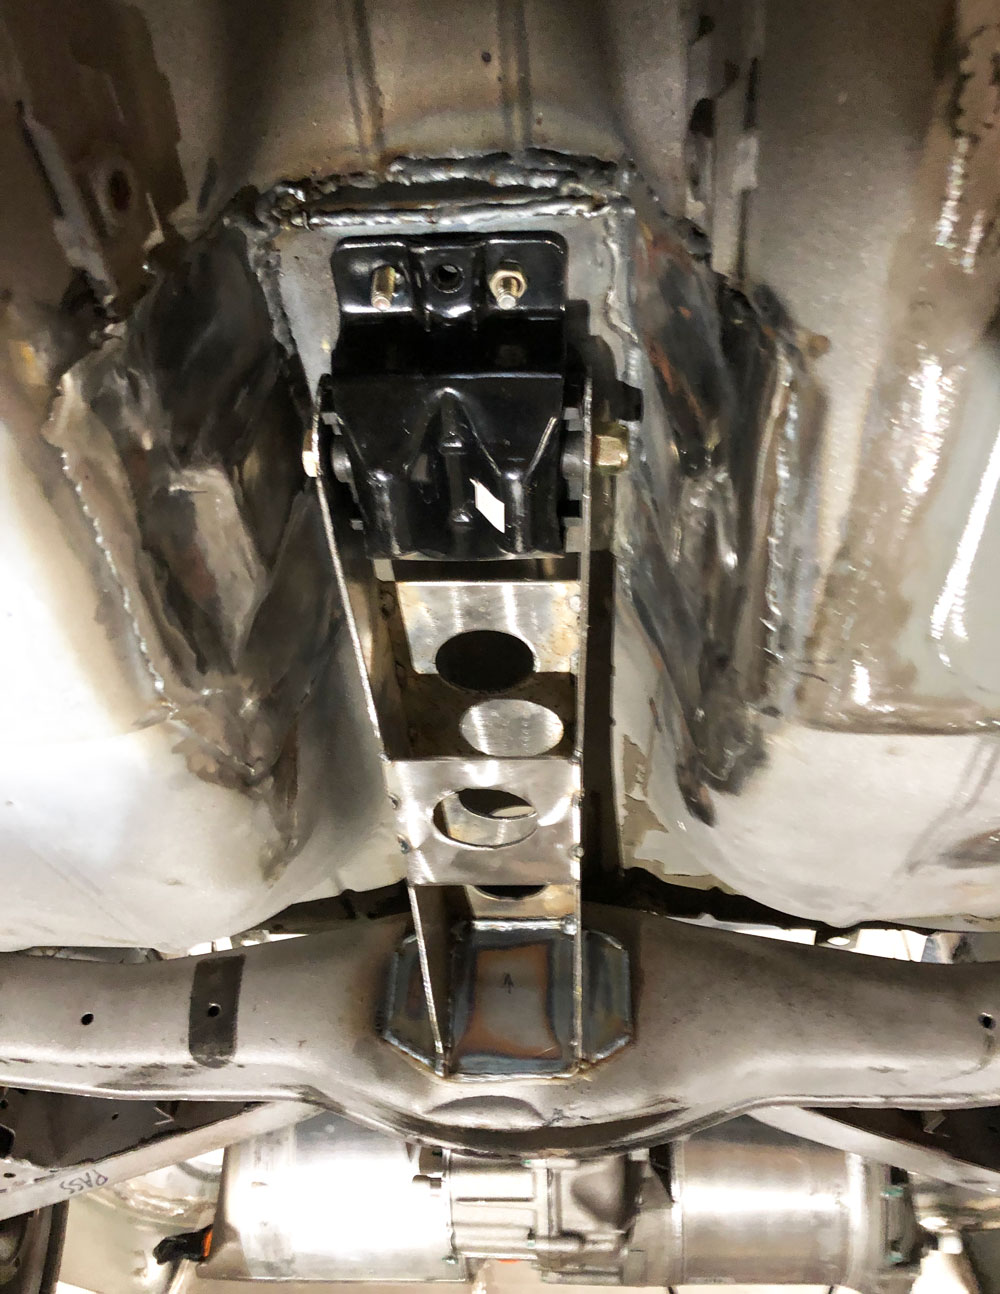 Looking front to rear, the subframe extension extends forward. Notice the Tesla unit in the rear, at the bottom of the photo.